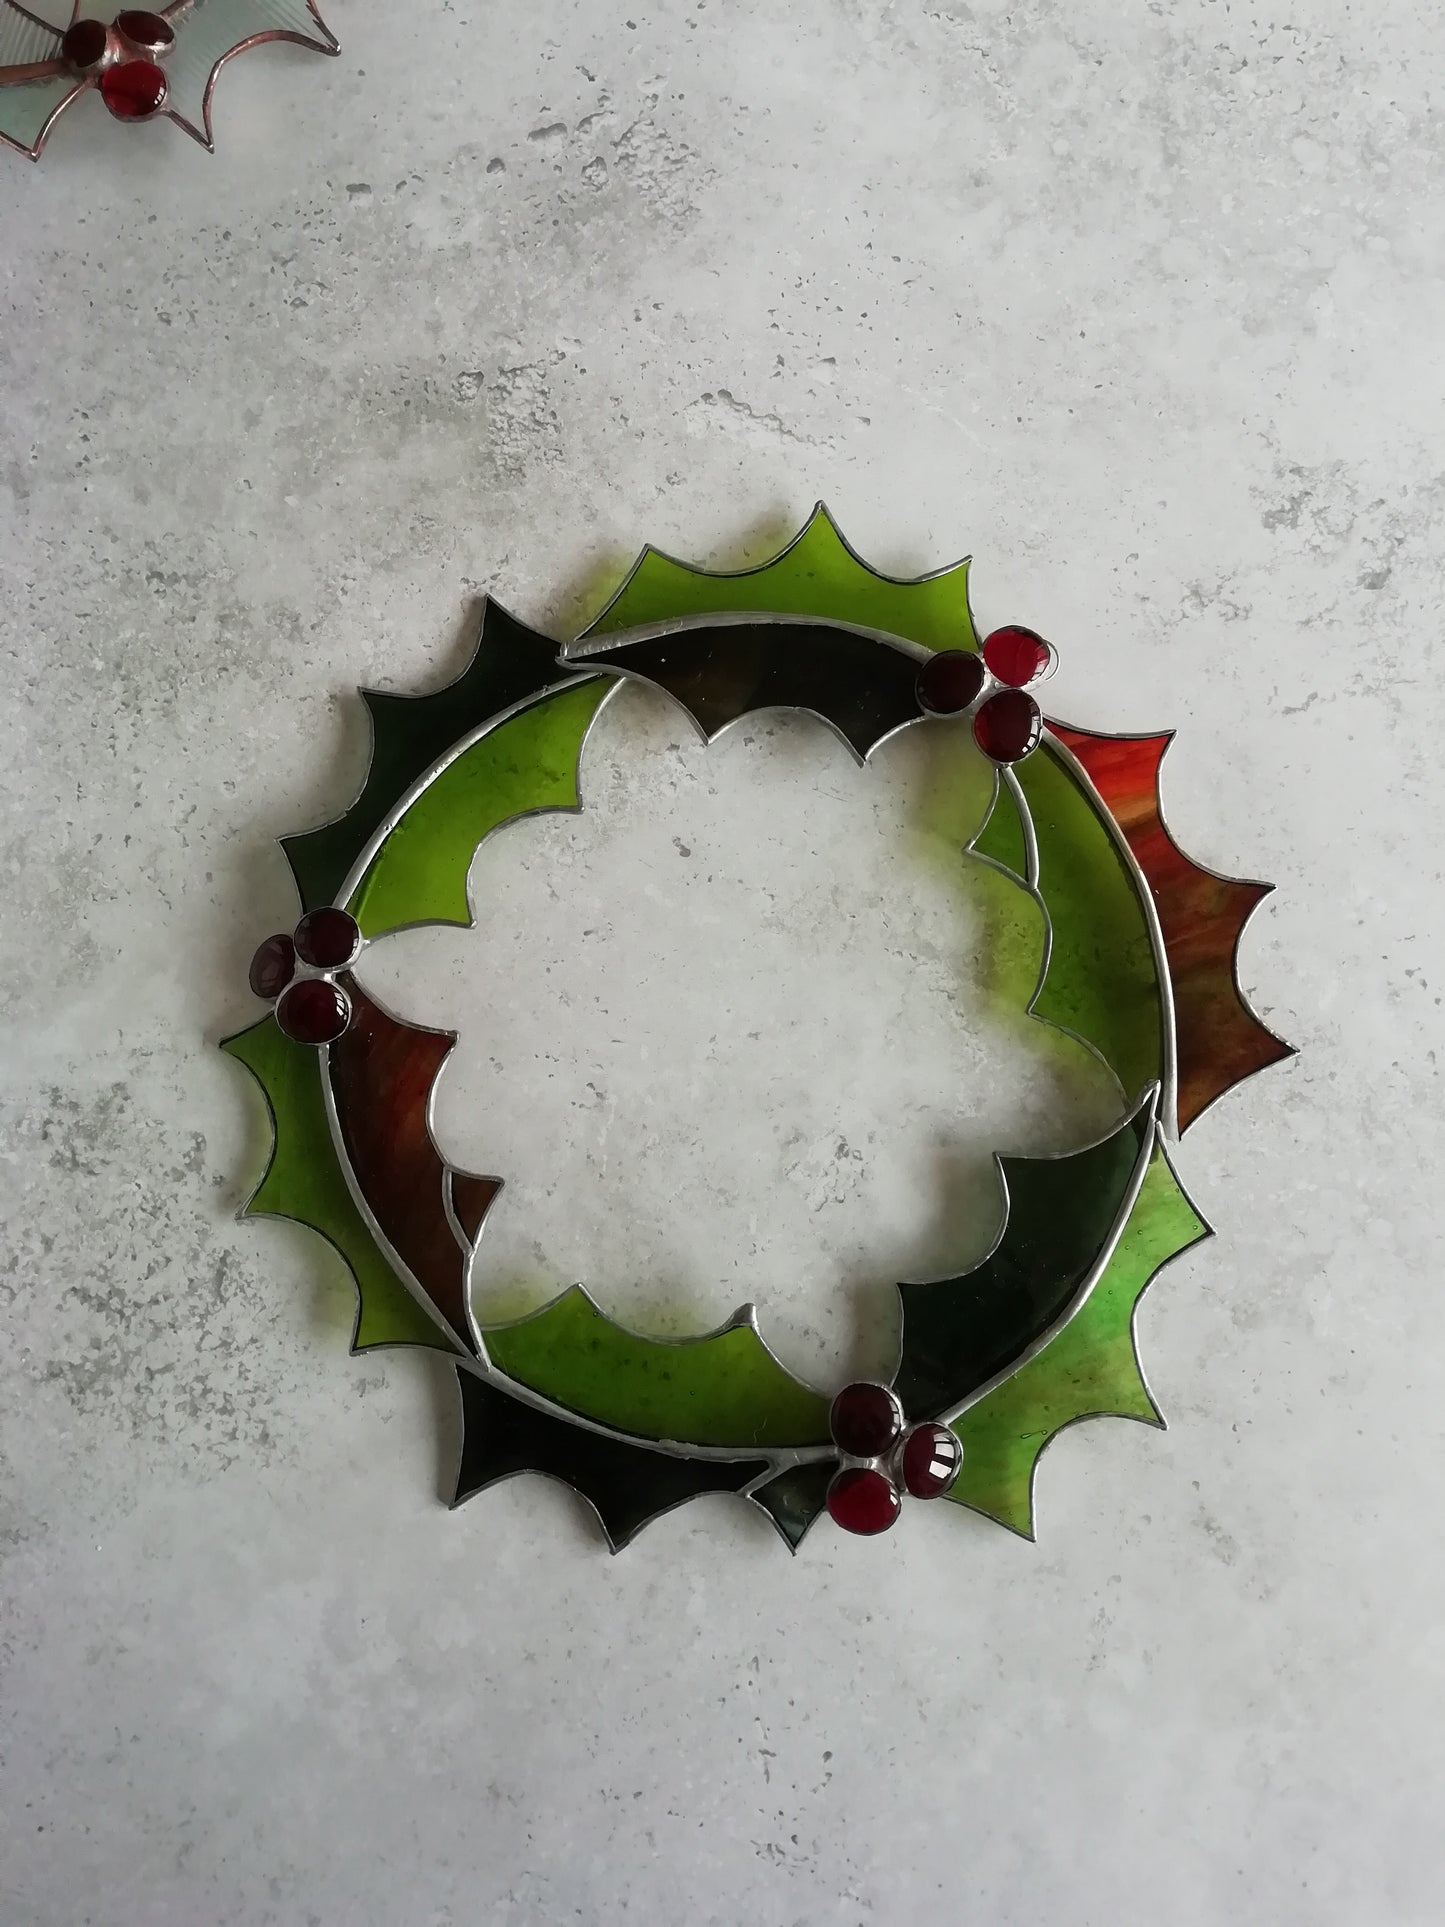 Stained glass holly wreaths